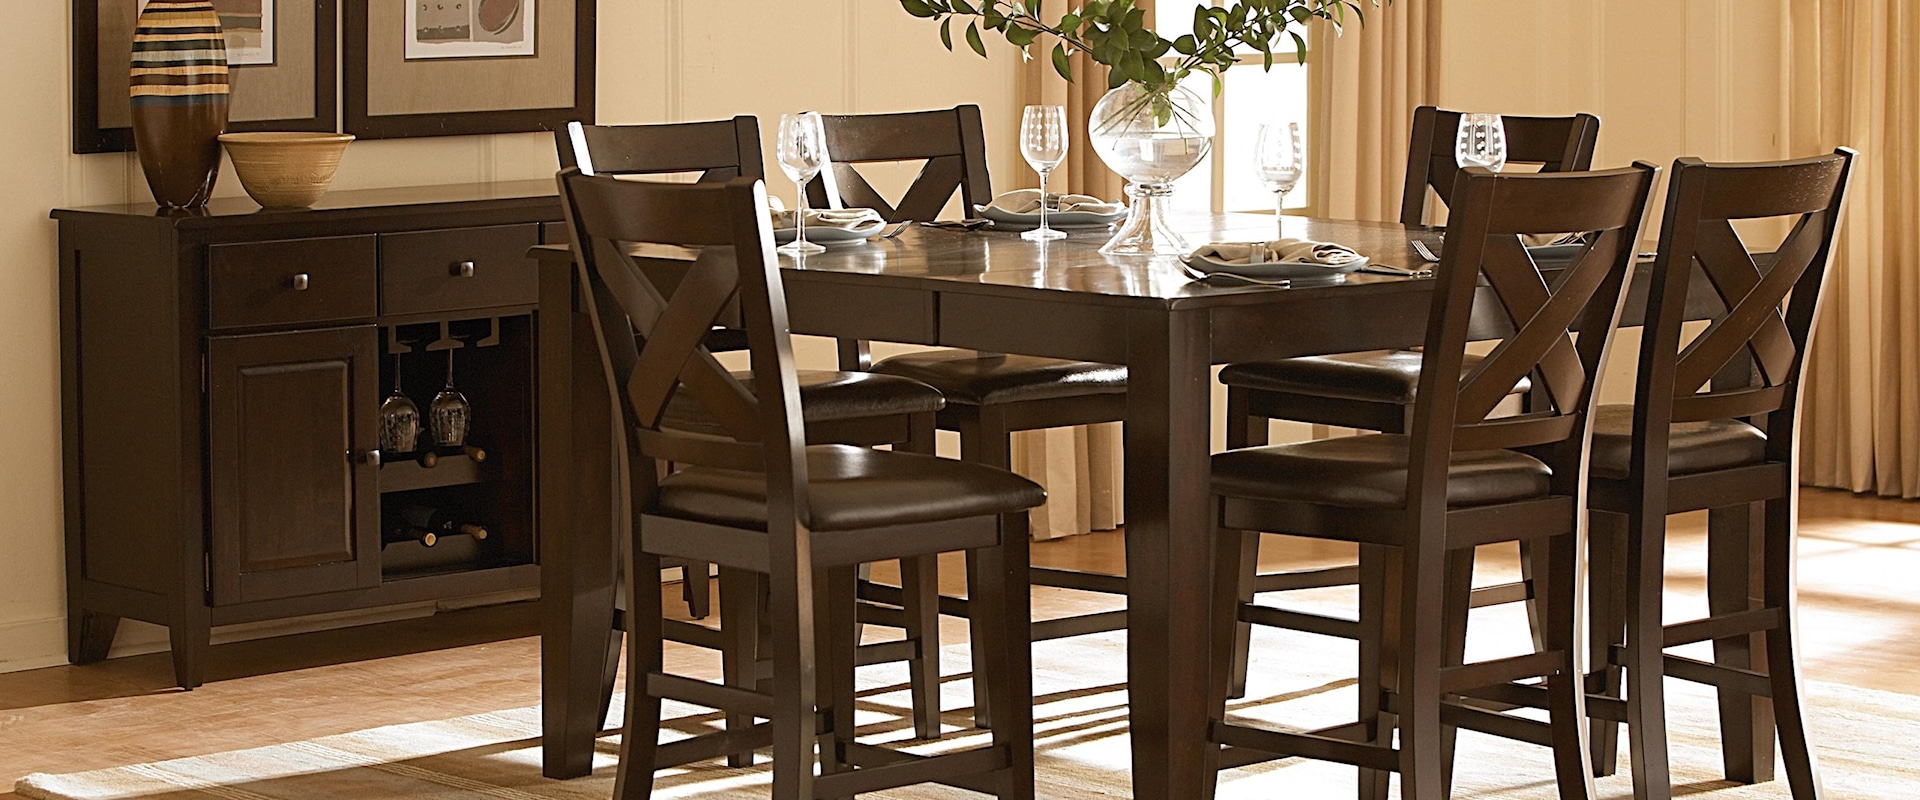 Transitional Formal Dining Room Group